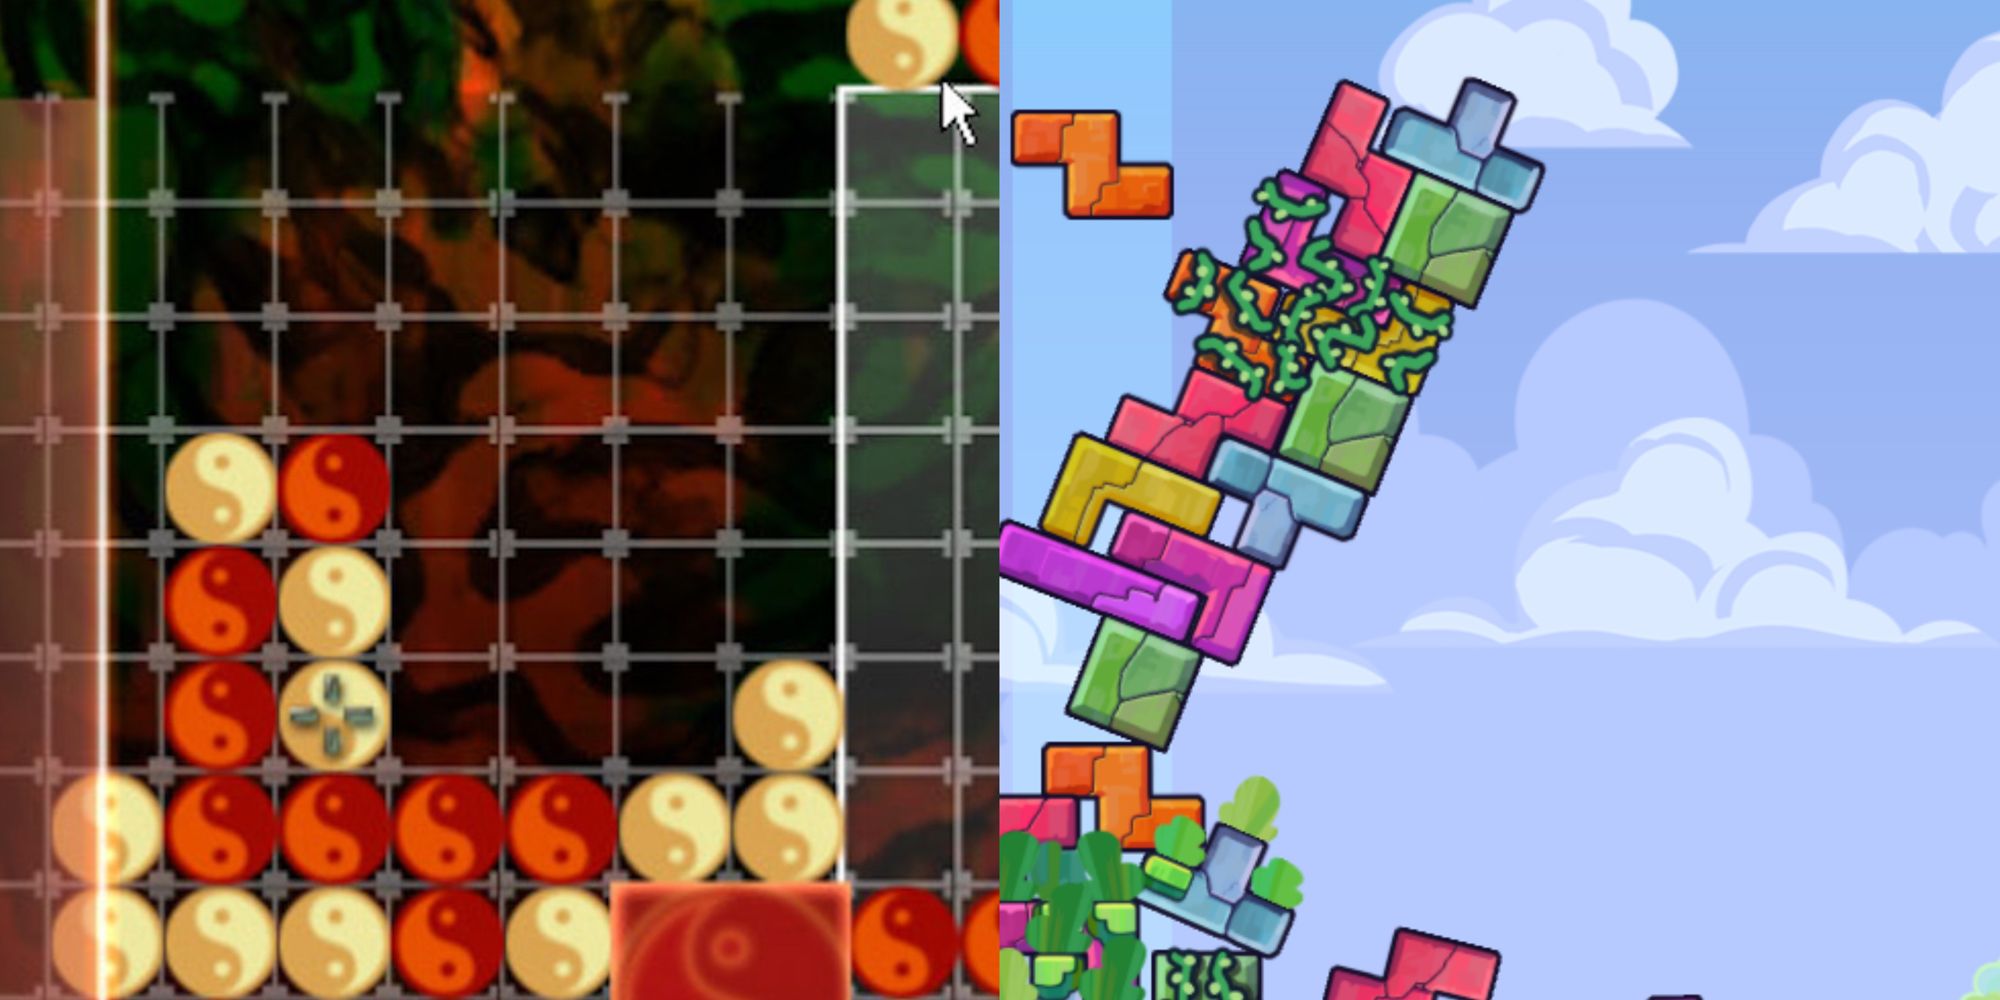 Blockbusters: Games for Tetris lovers